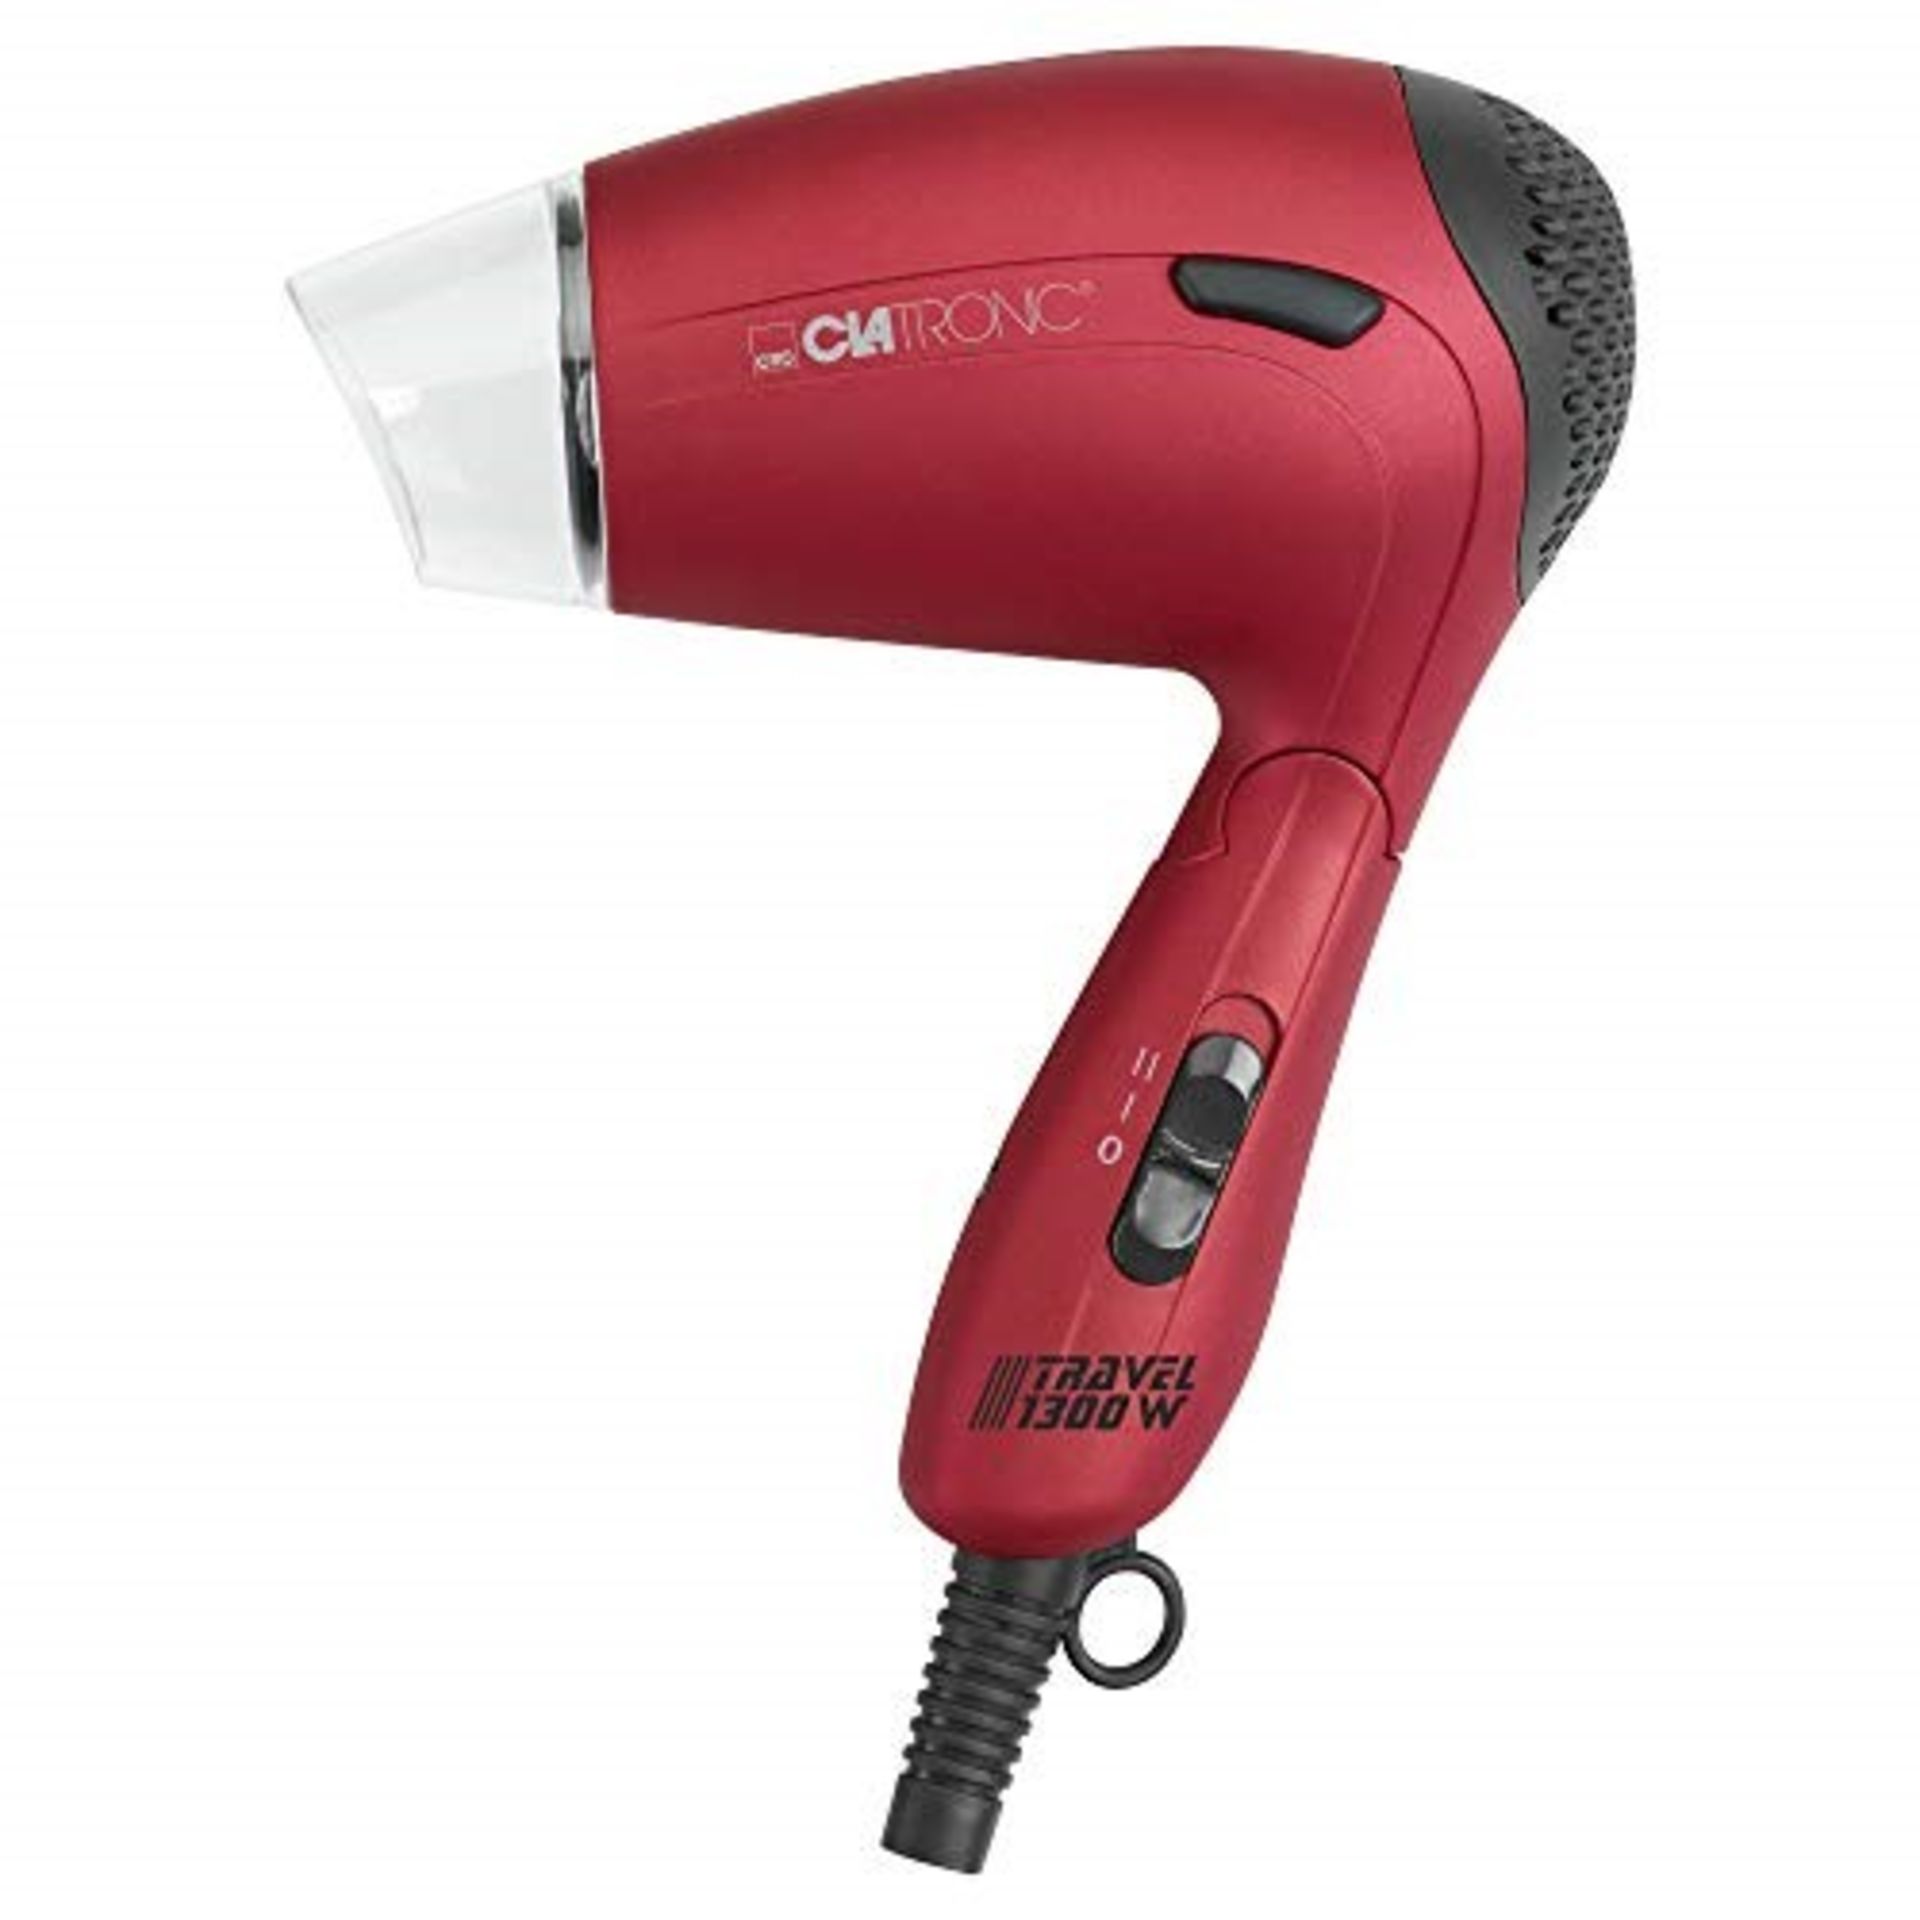 Clatronic Travel Hairdryer Red 1300W HTD3429-RD - Image 3 of 4